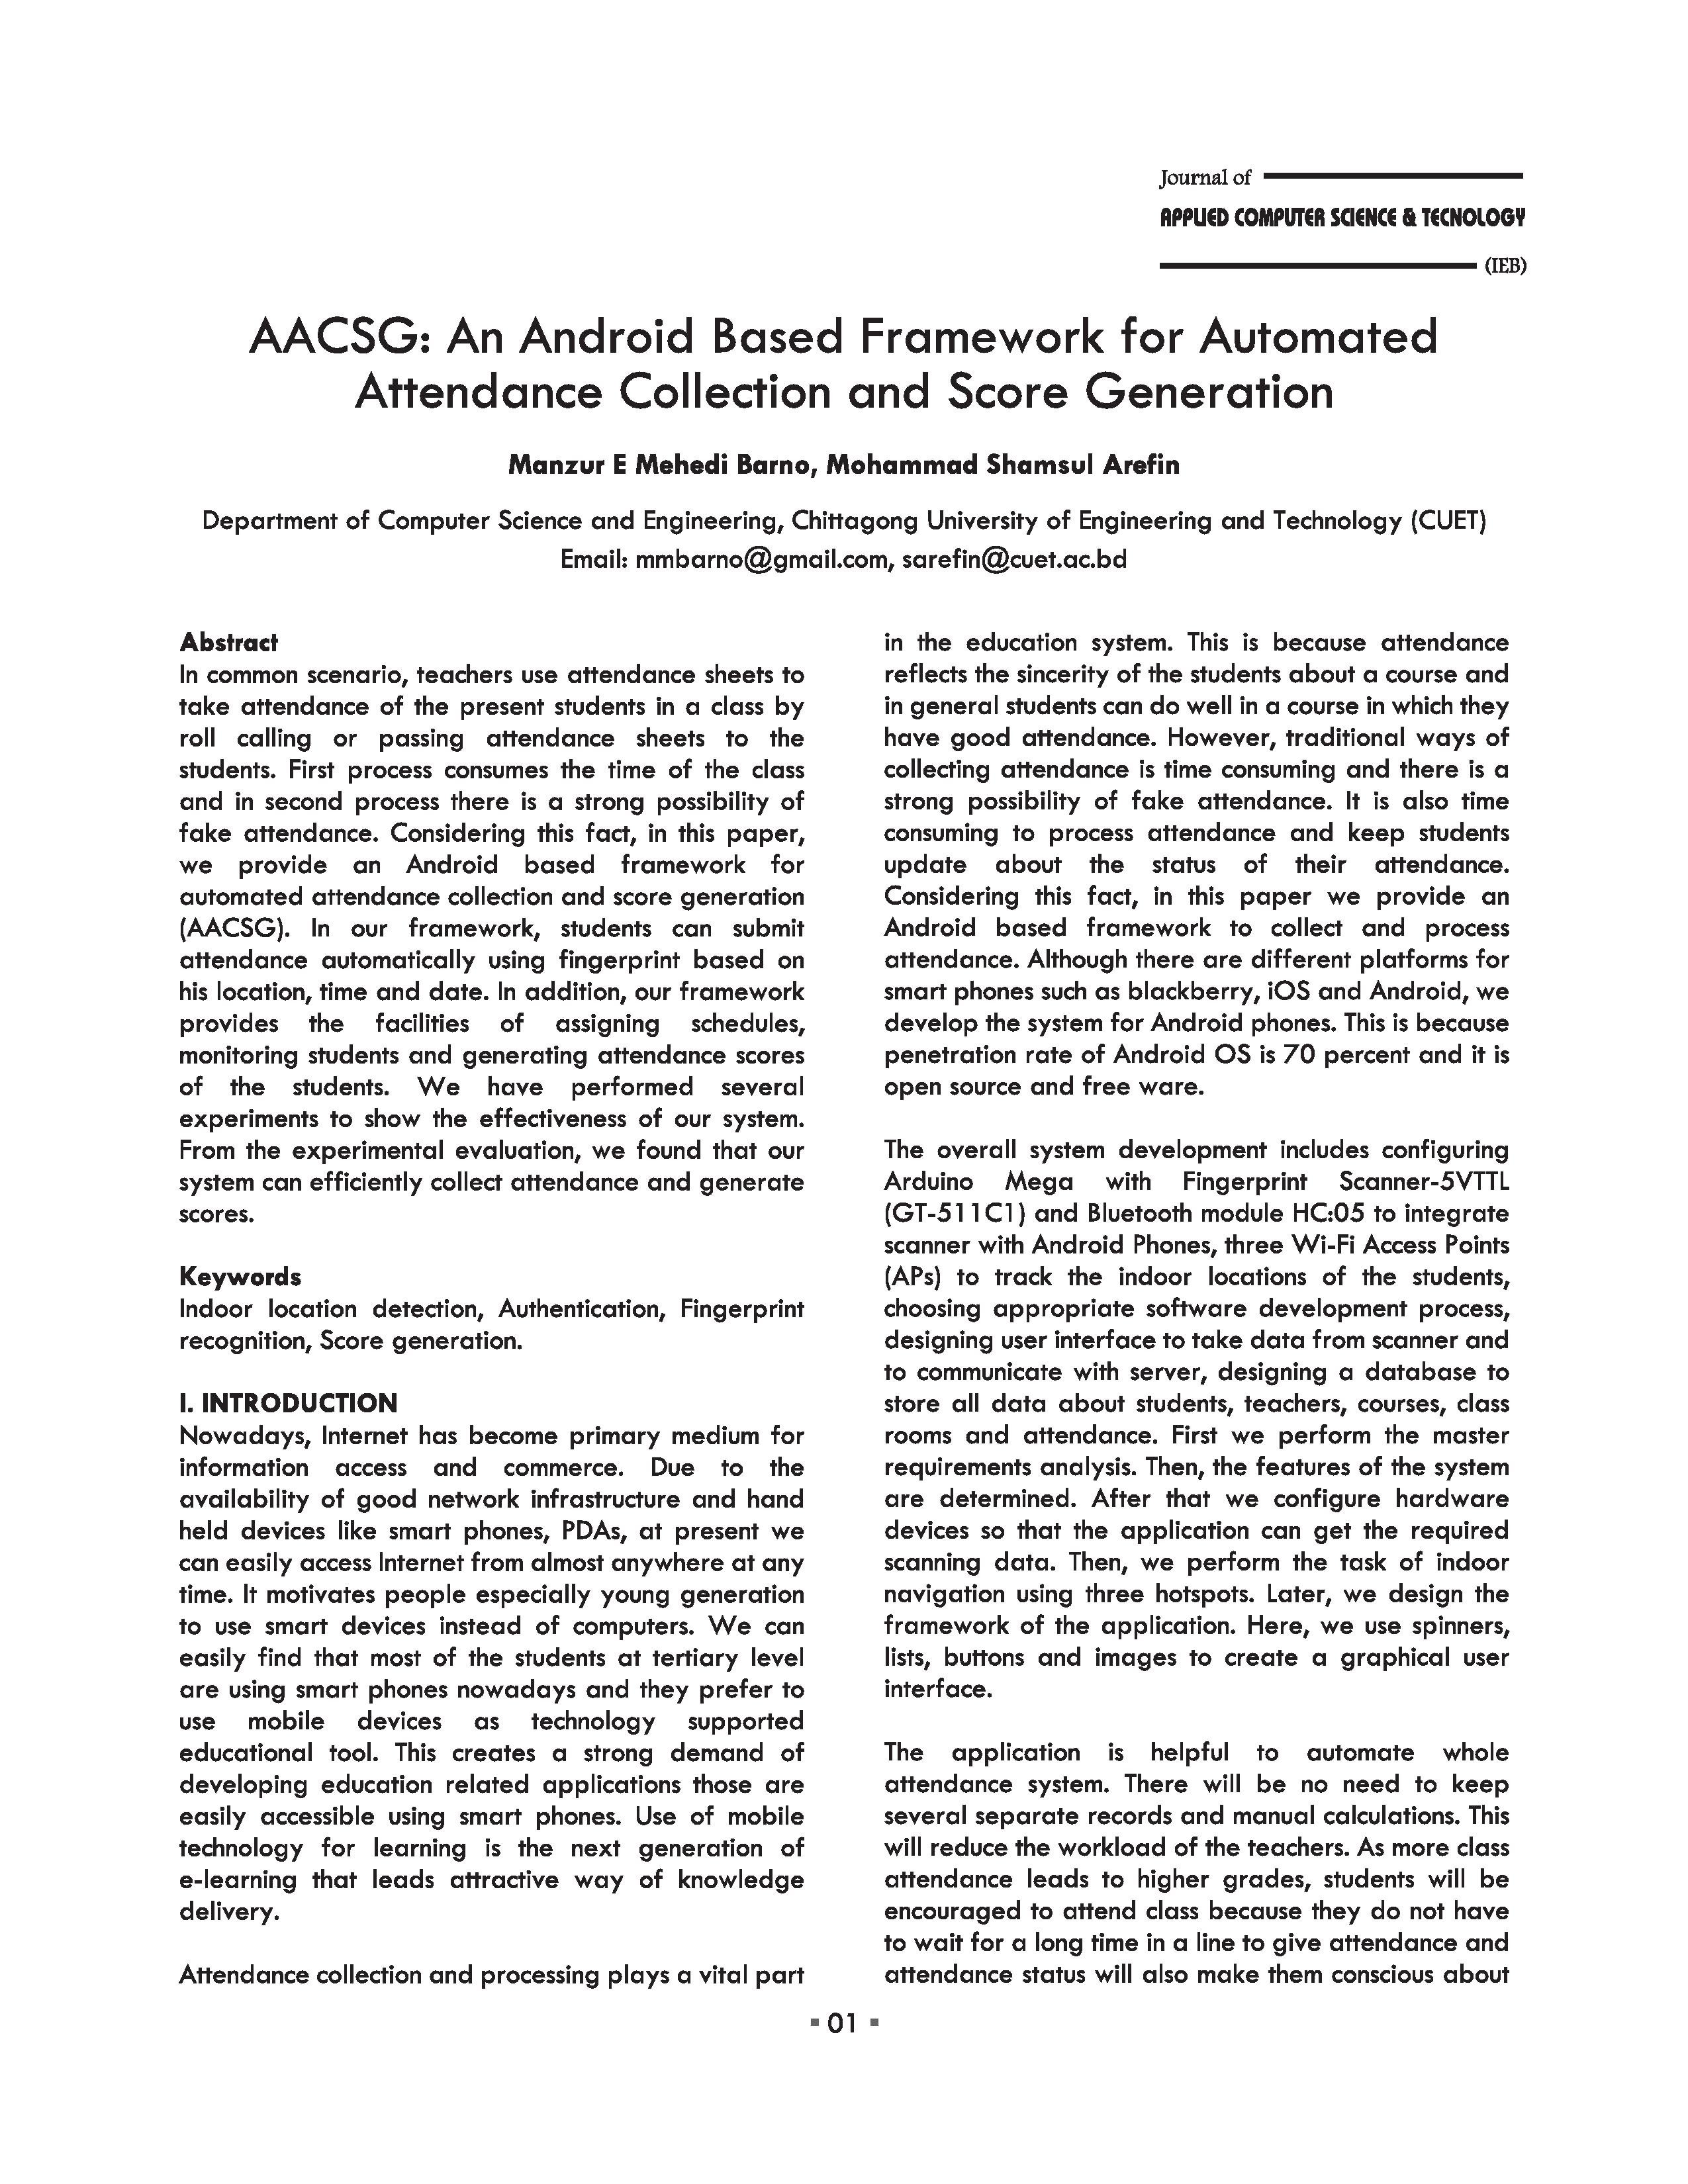 AACSG: An Android Based Framework for Automated